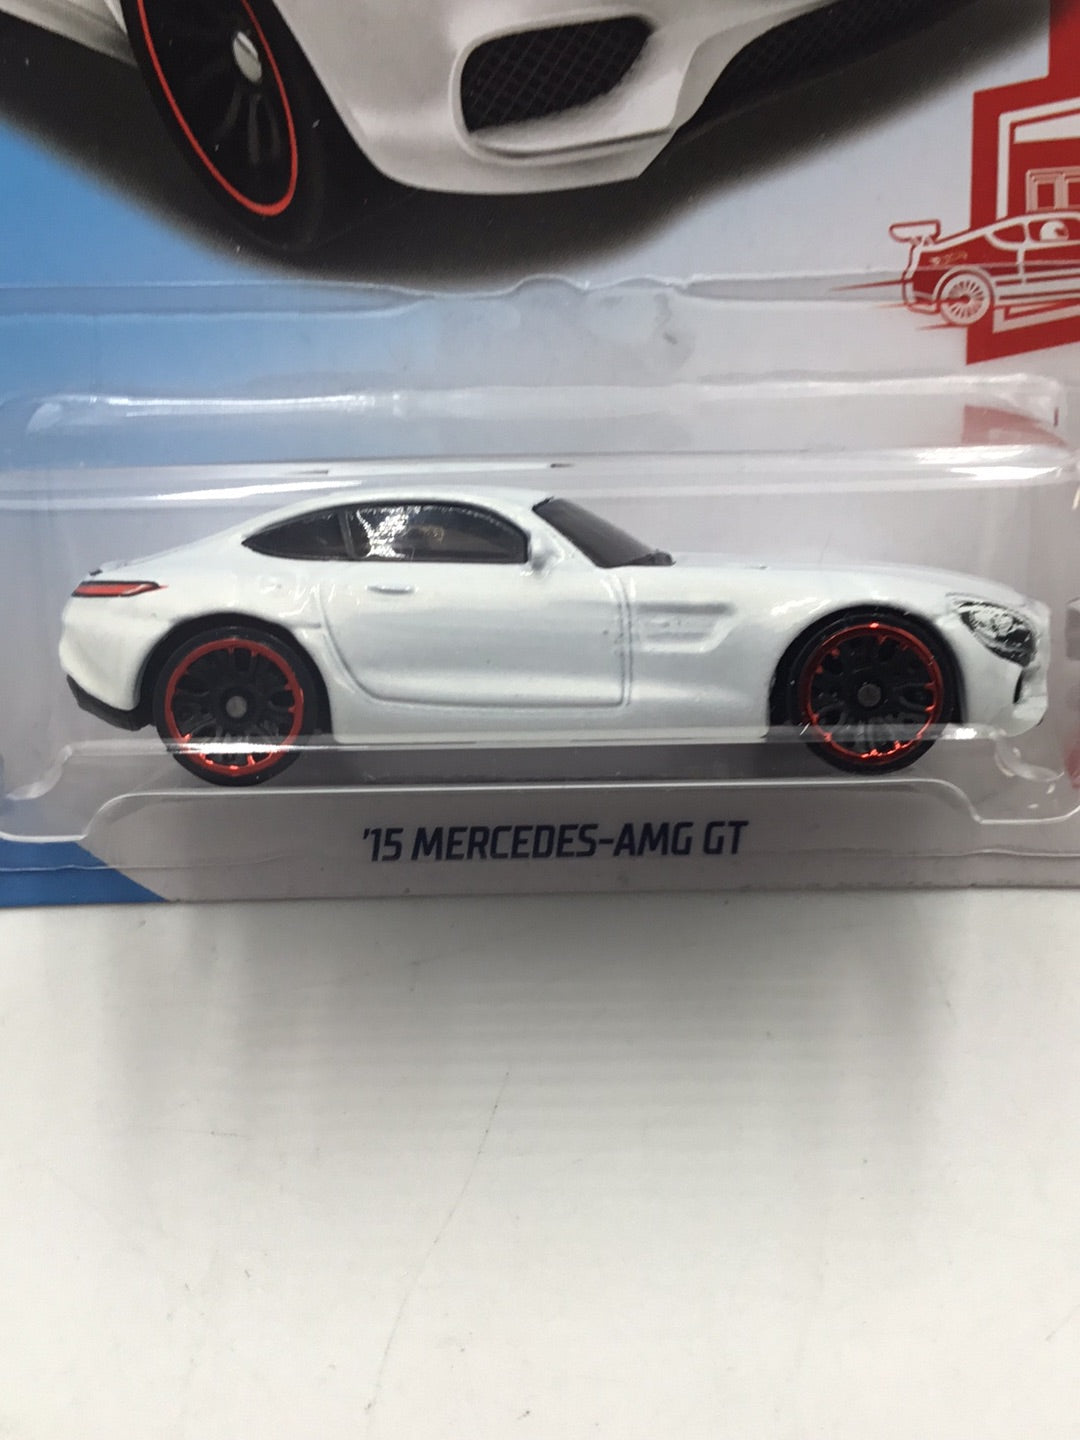 2018 hot wheels red edition #12 target red factory sealed sticker